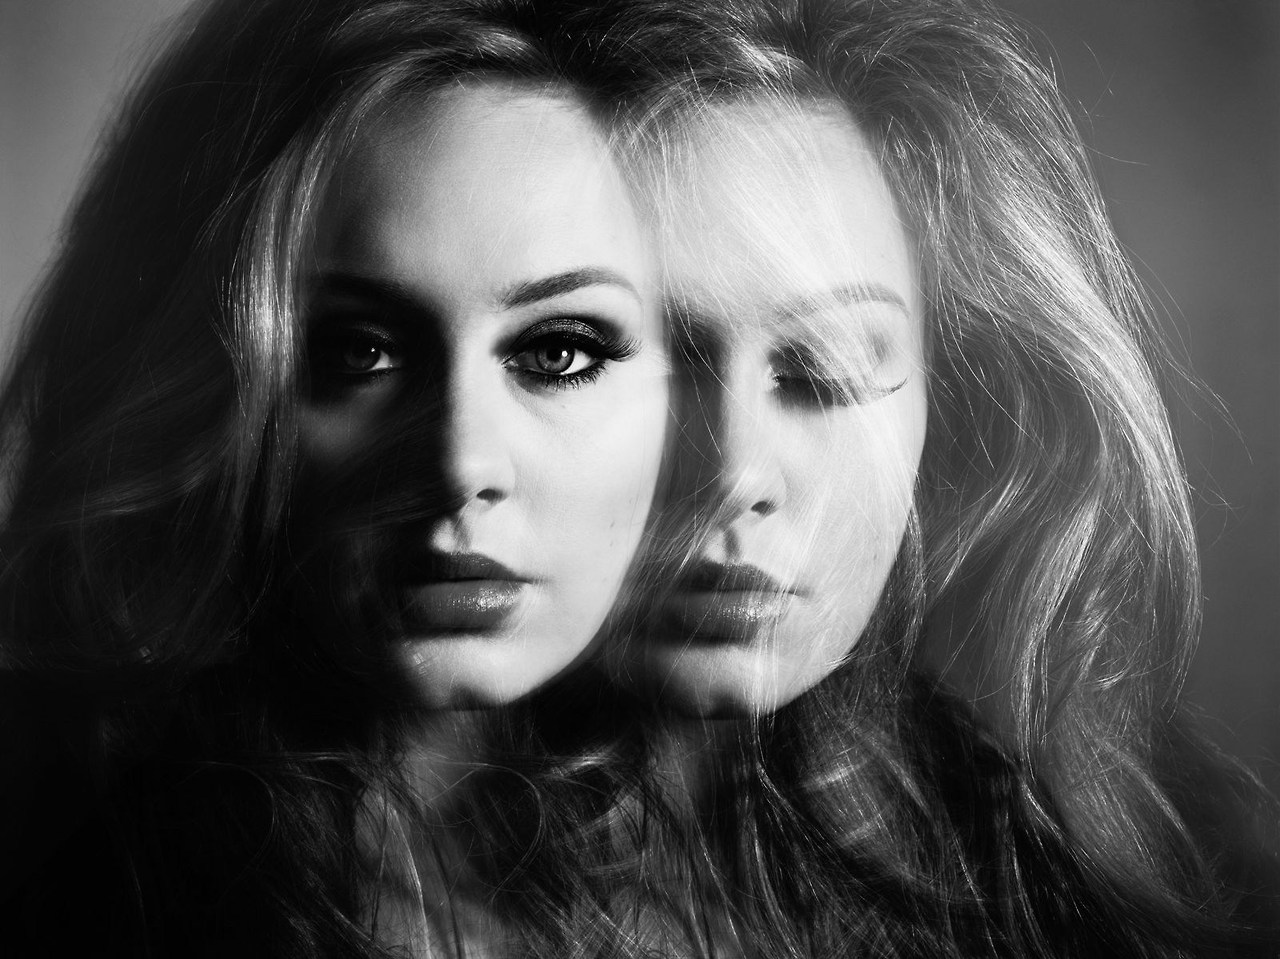 Adele To Release New Album In November | Music News - Conversations About Her1280 x 959